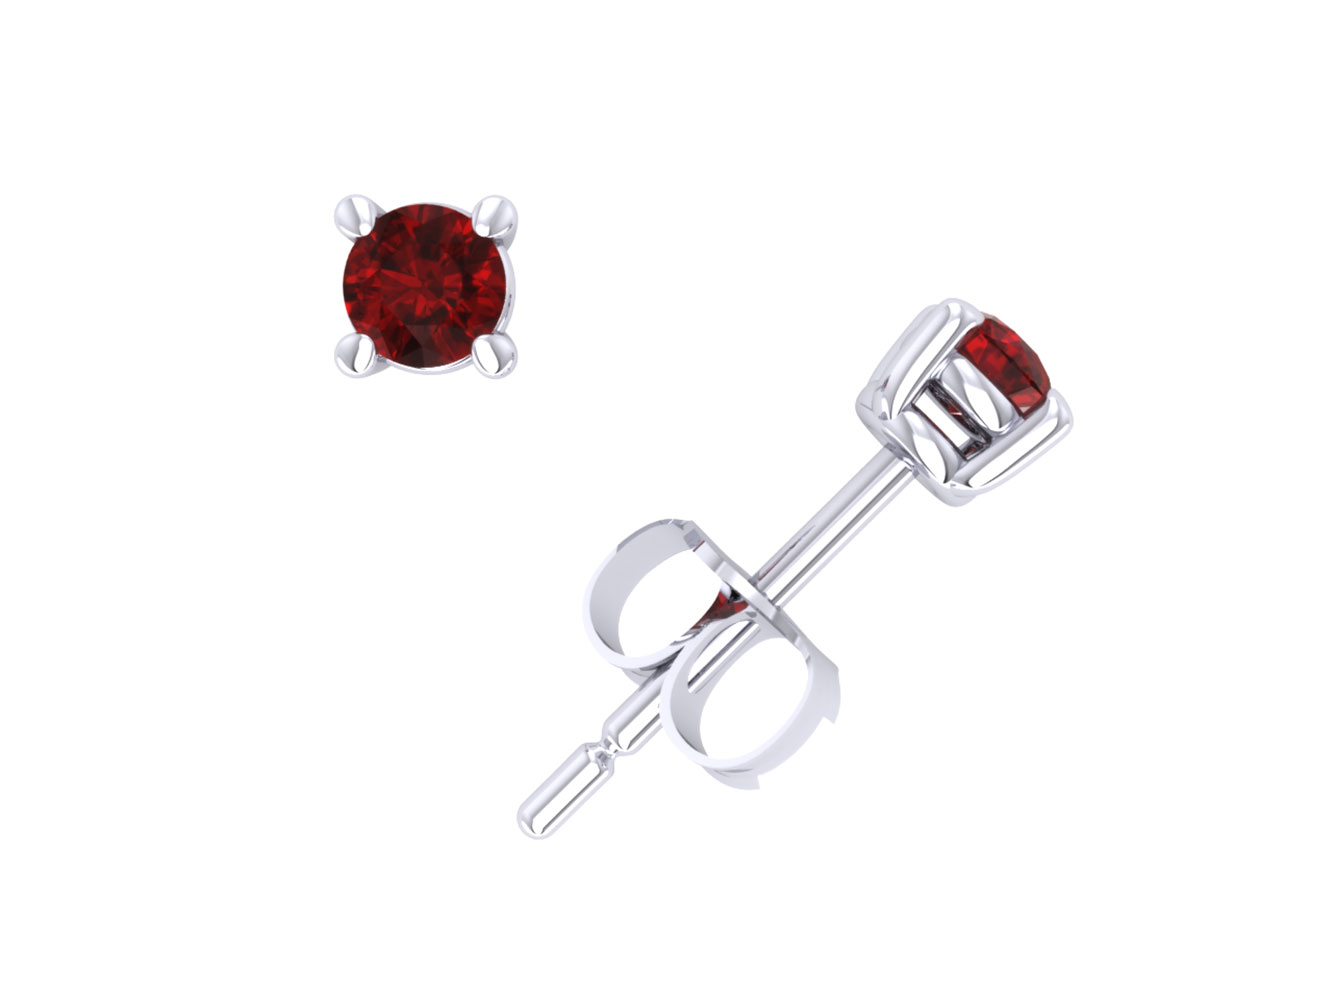 Jewel We Sell Genuine 0.15Carat Round Cut Ruby Basket Stud Earrings 18k White or Yellow Gold Prong AAAA